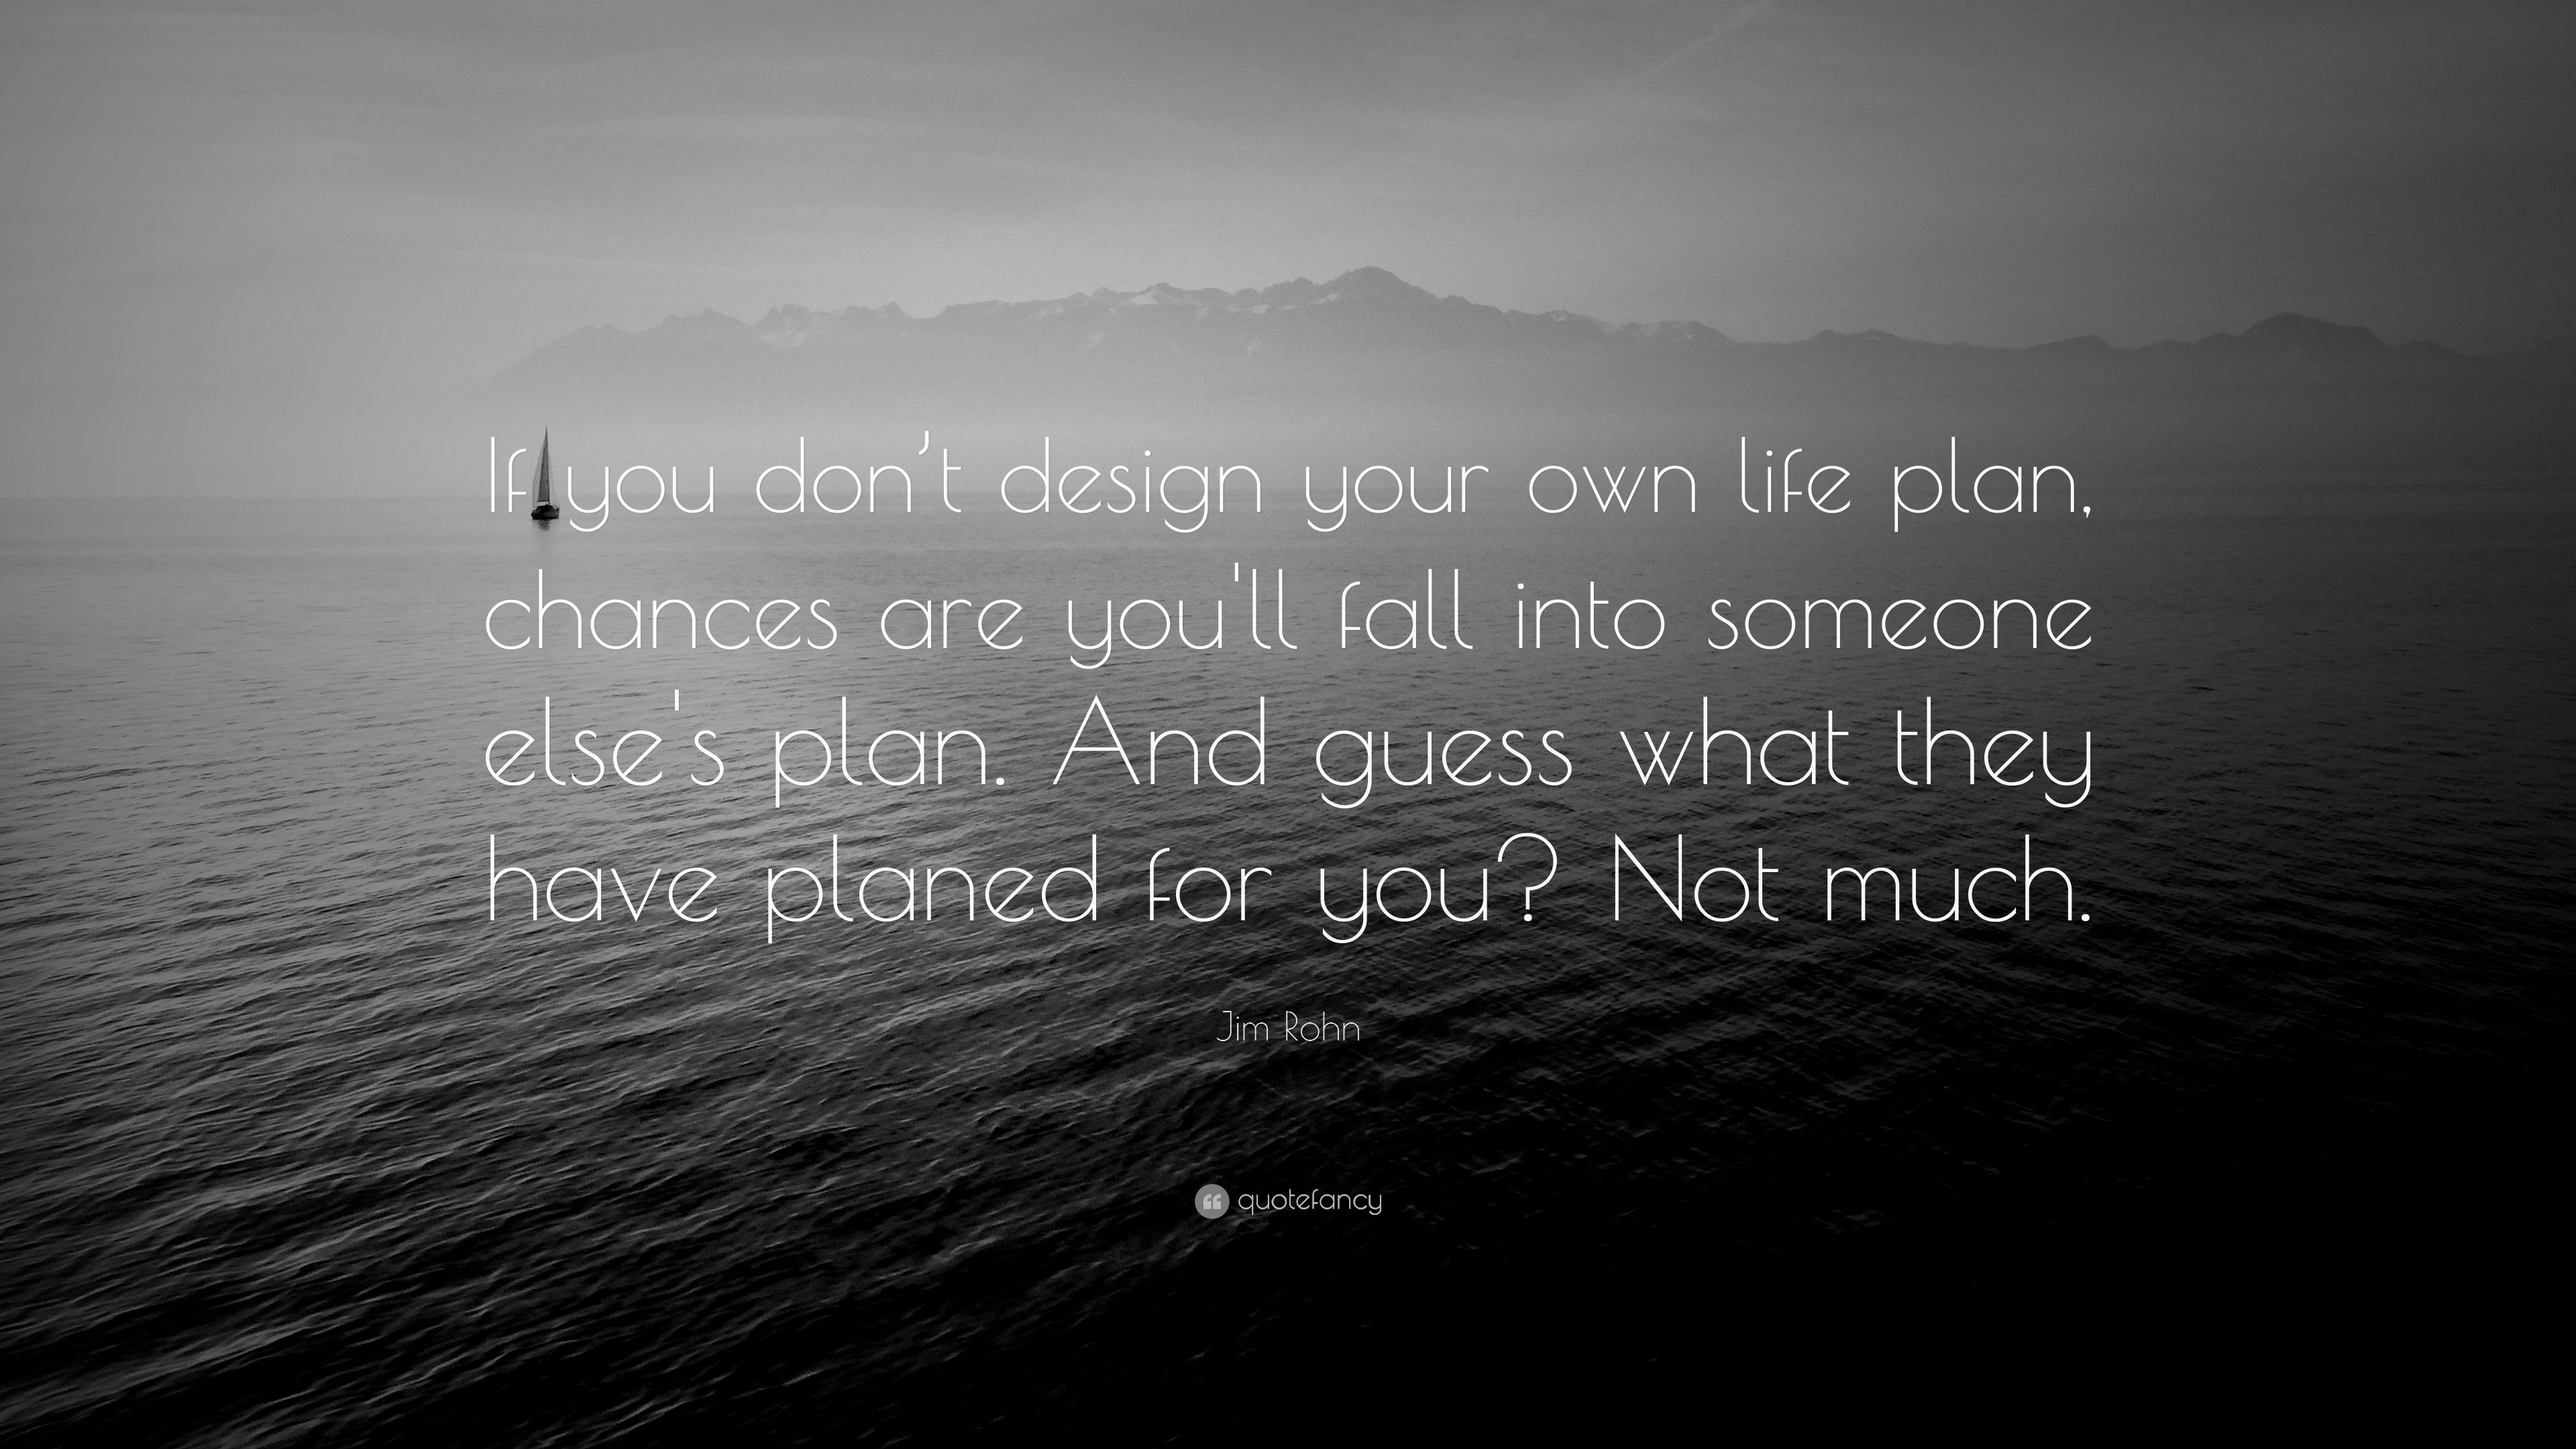 Jim Rohn Quote “If you don’t design your own life plan